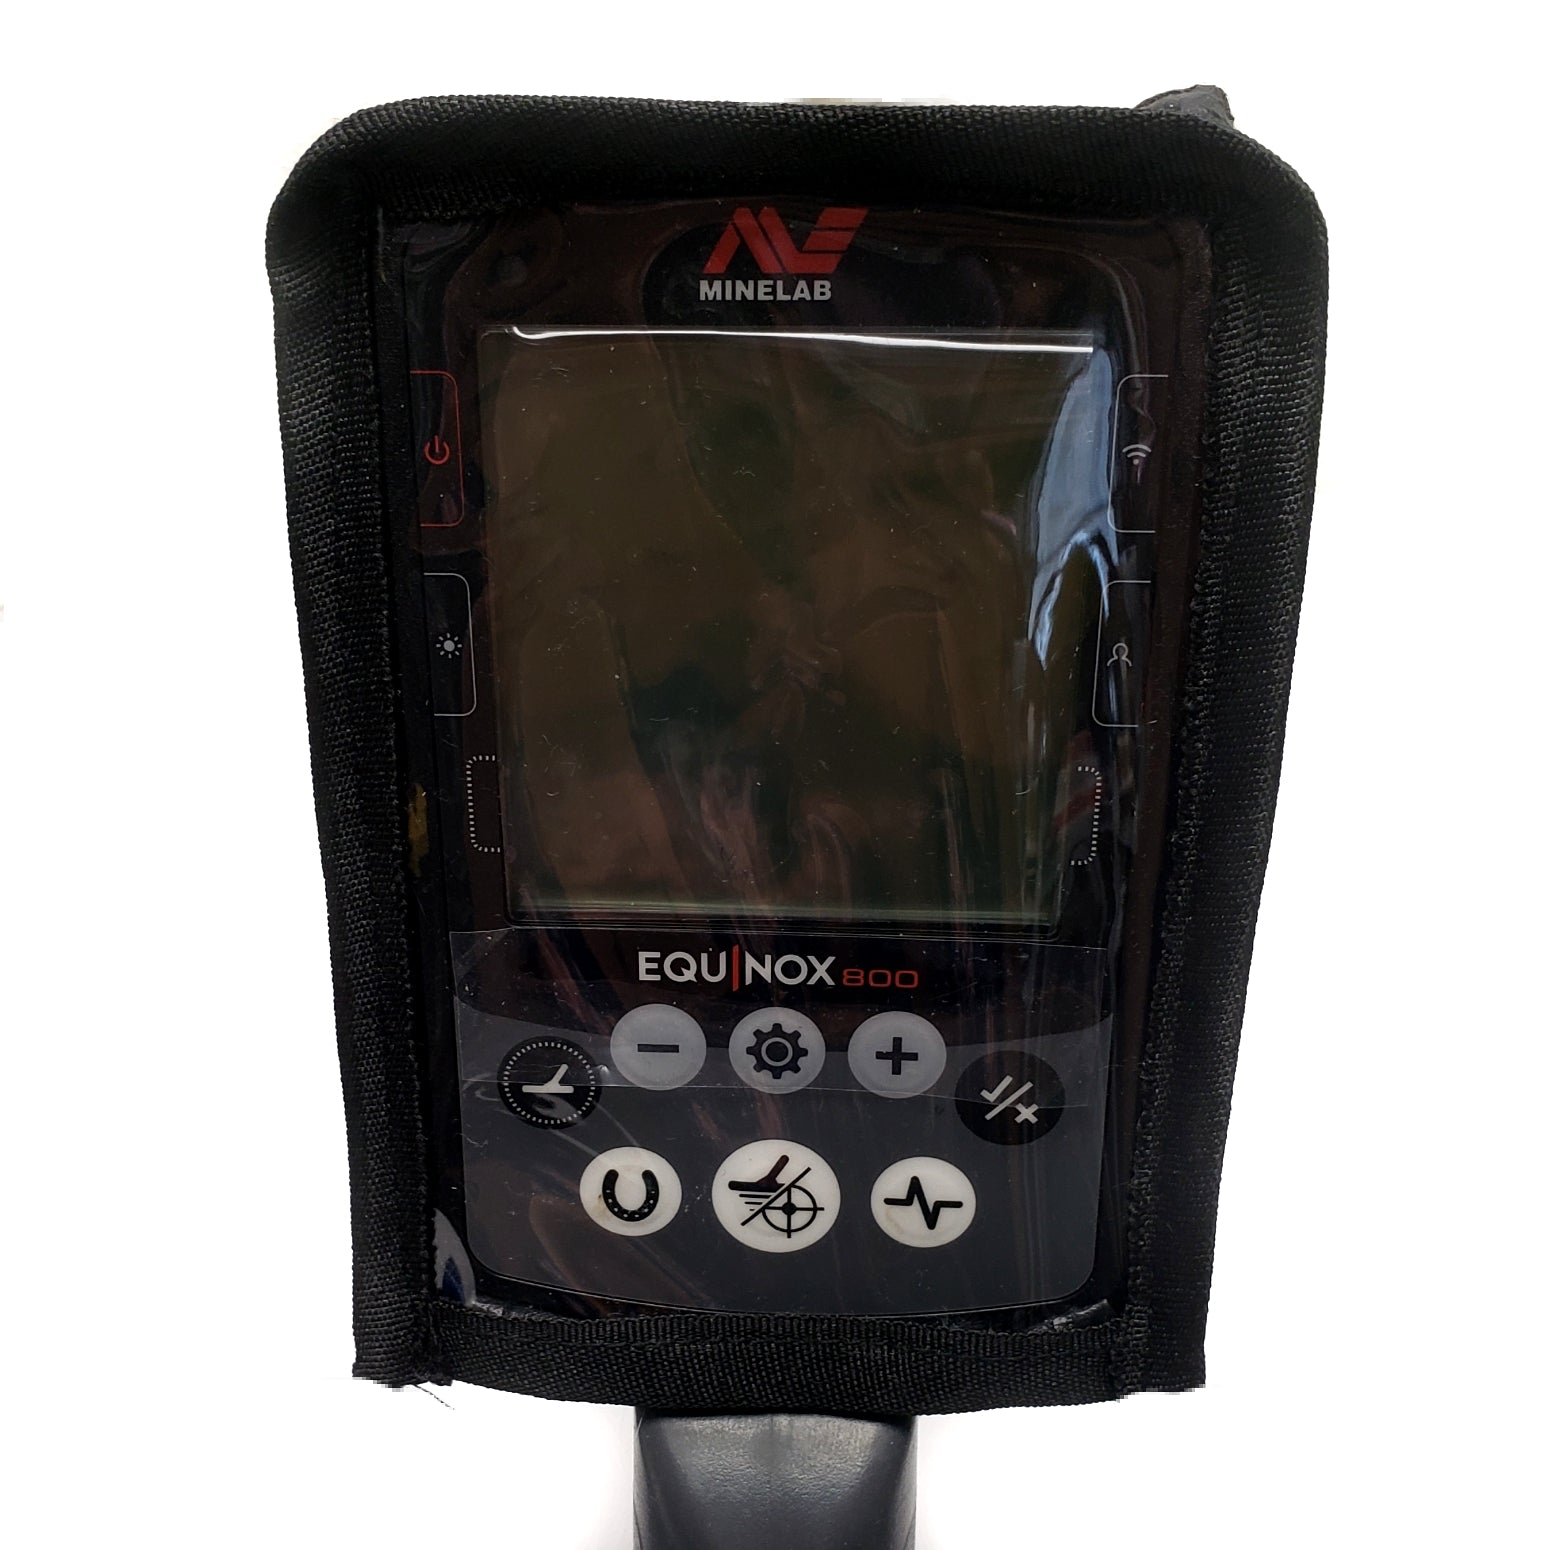 Metal Detector Waterproof for Equinox Minelab 800 600, Rain Dirt, Dust Cover  (Cover Only) Ship from US - UproMax